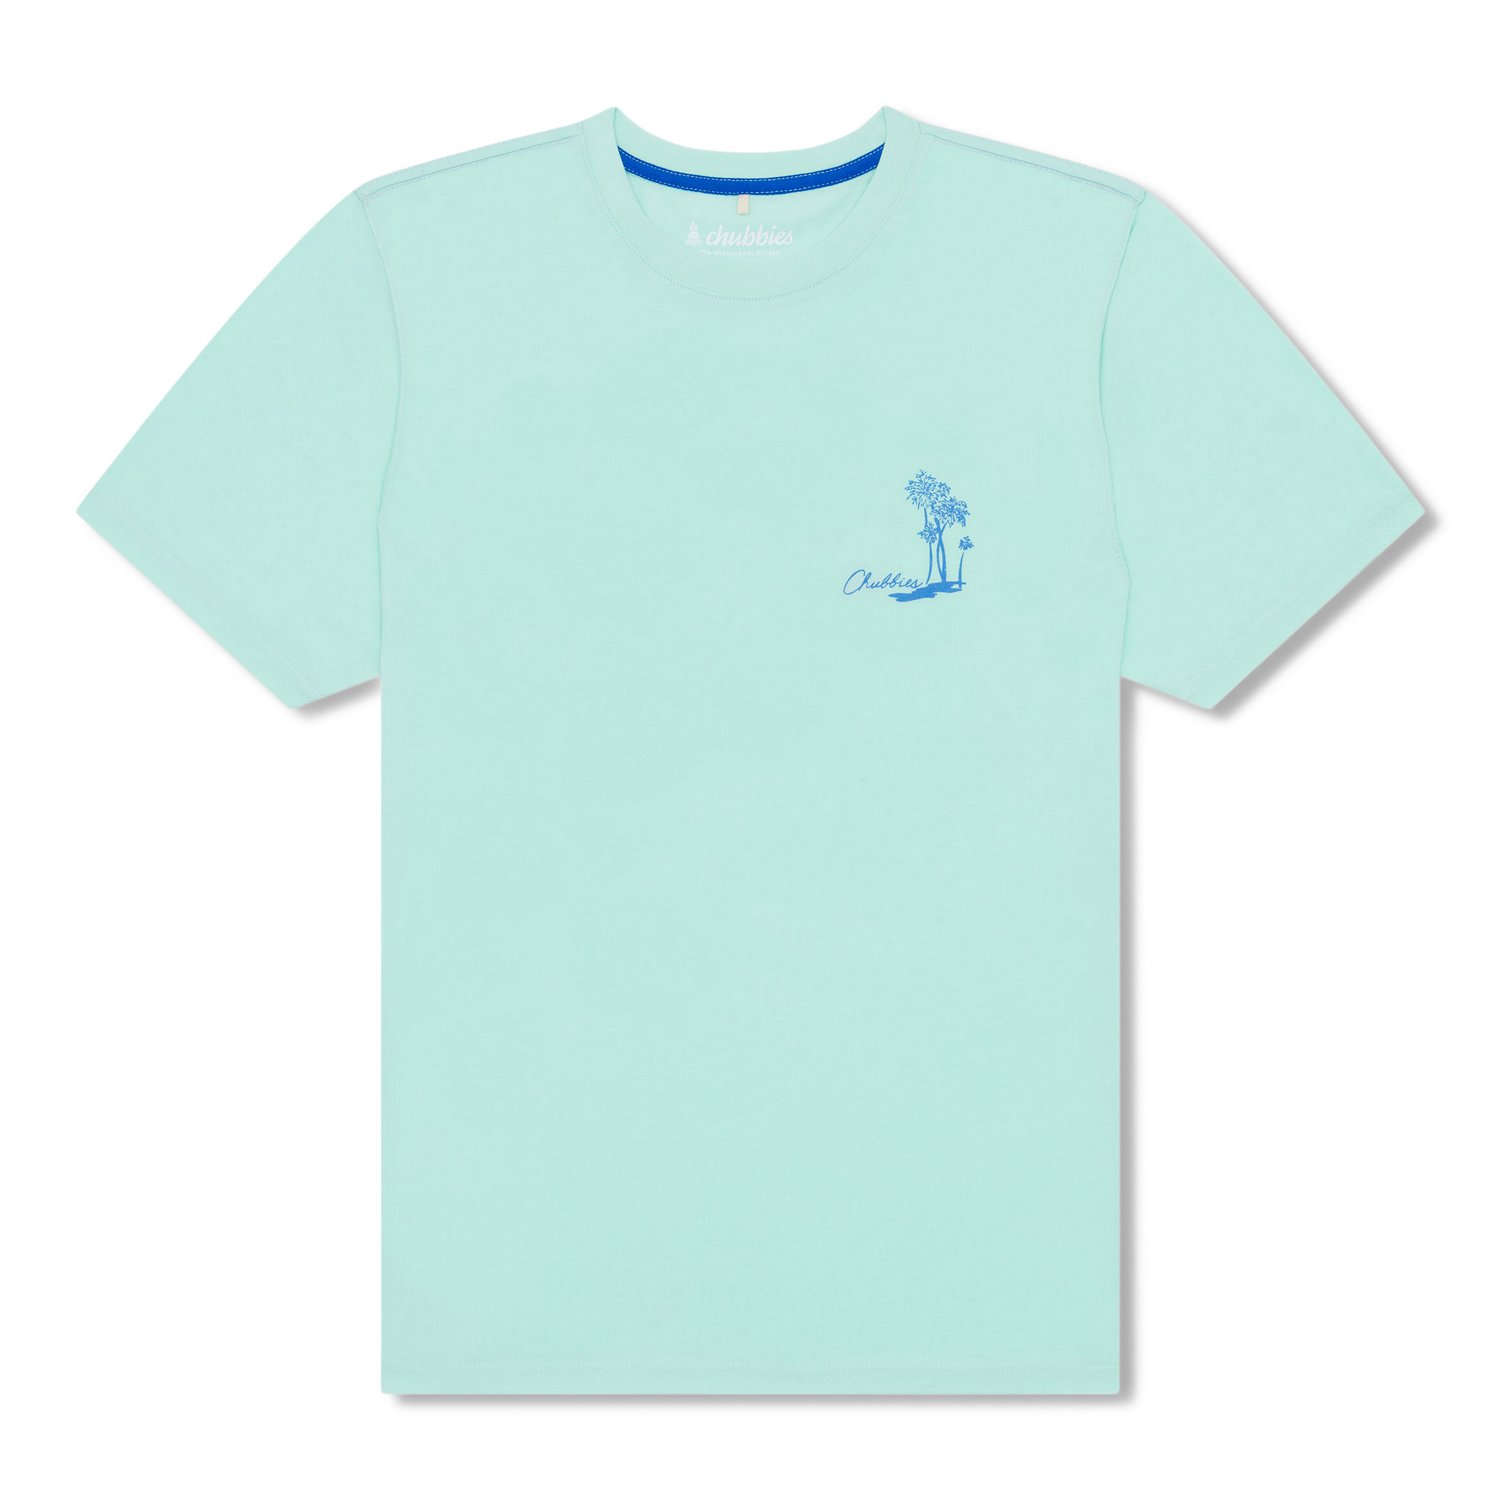 Chubbies Men's The Float Your Boat T-Shirt